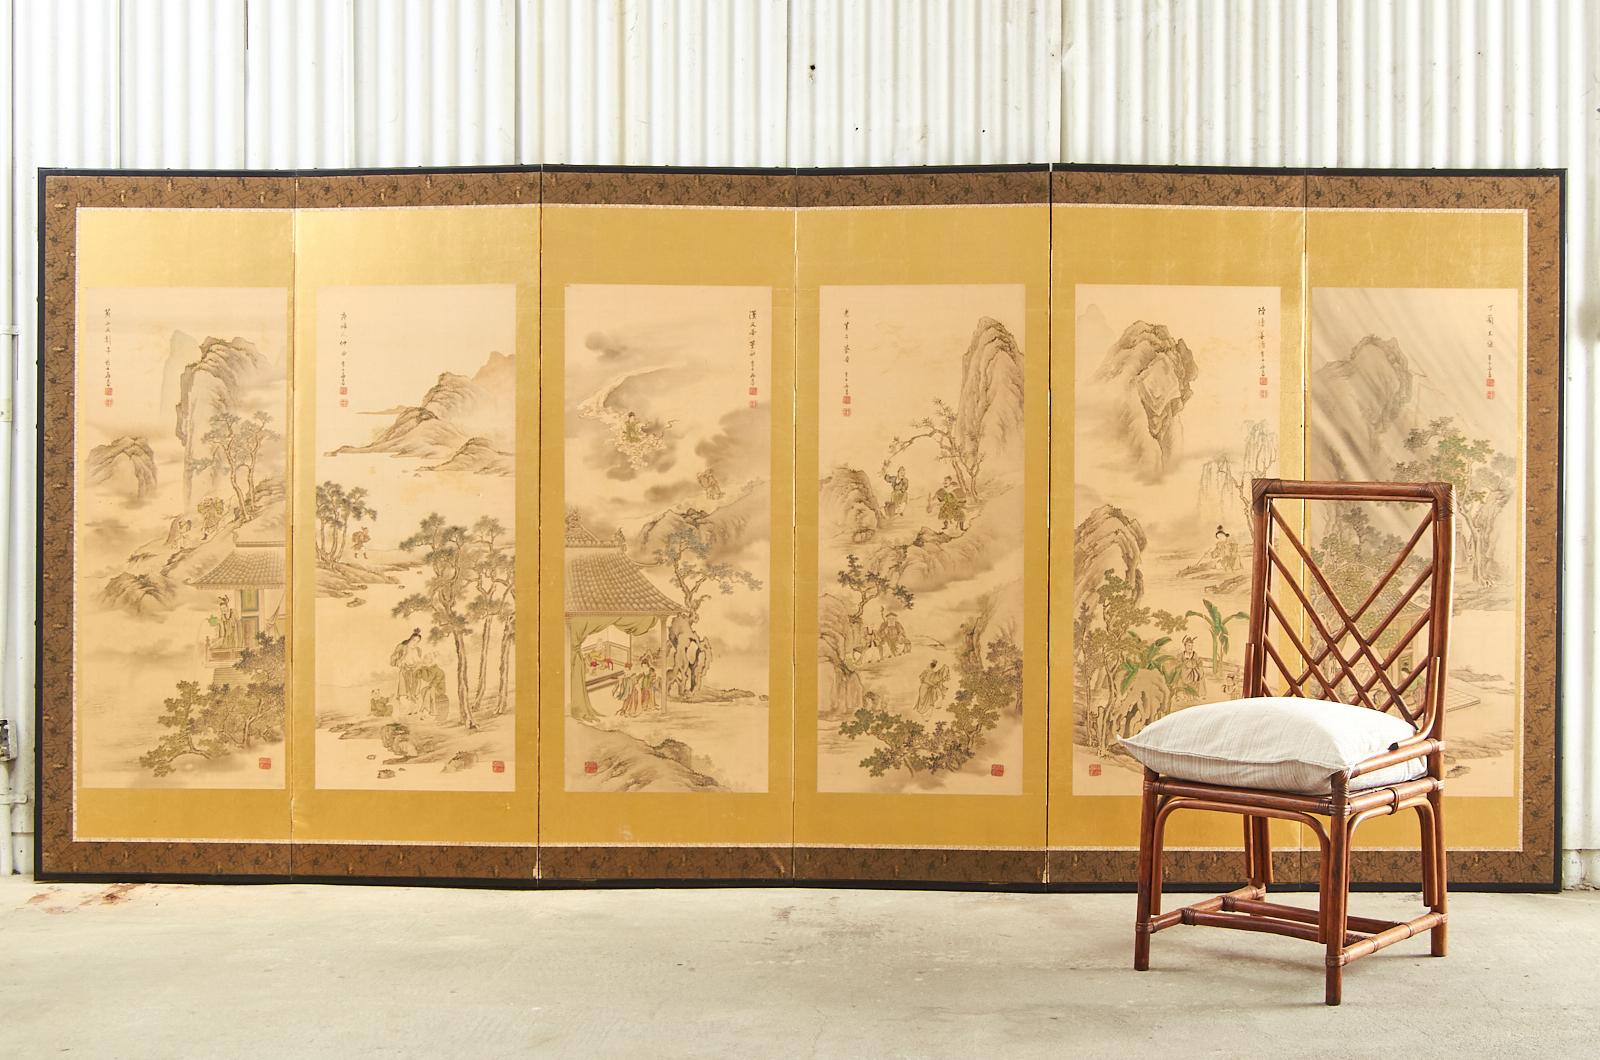 Impressive pair of Japanese screens from the Taisho period meiji. Each six-panel screen depicts an image from the 24 paragons of filial piety Confucian stories written by Guo Jujing during the Yuan dynasty. Ink and natural color pigments on